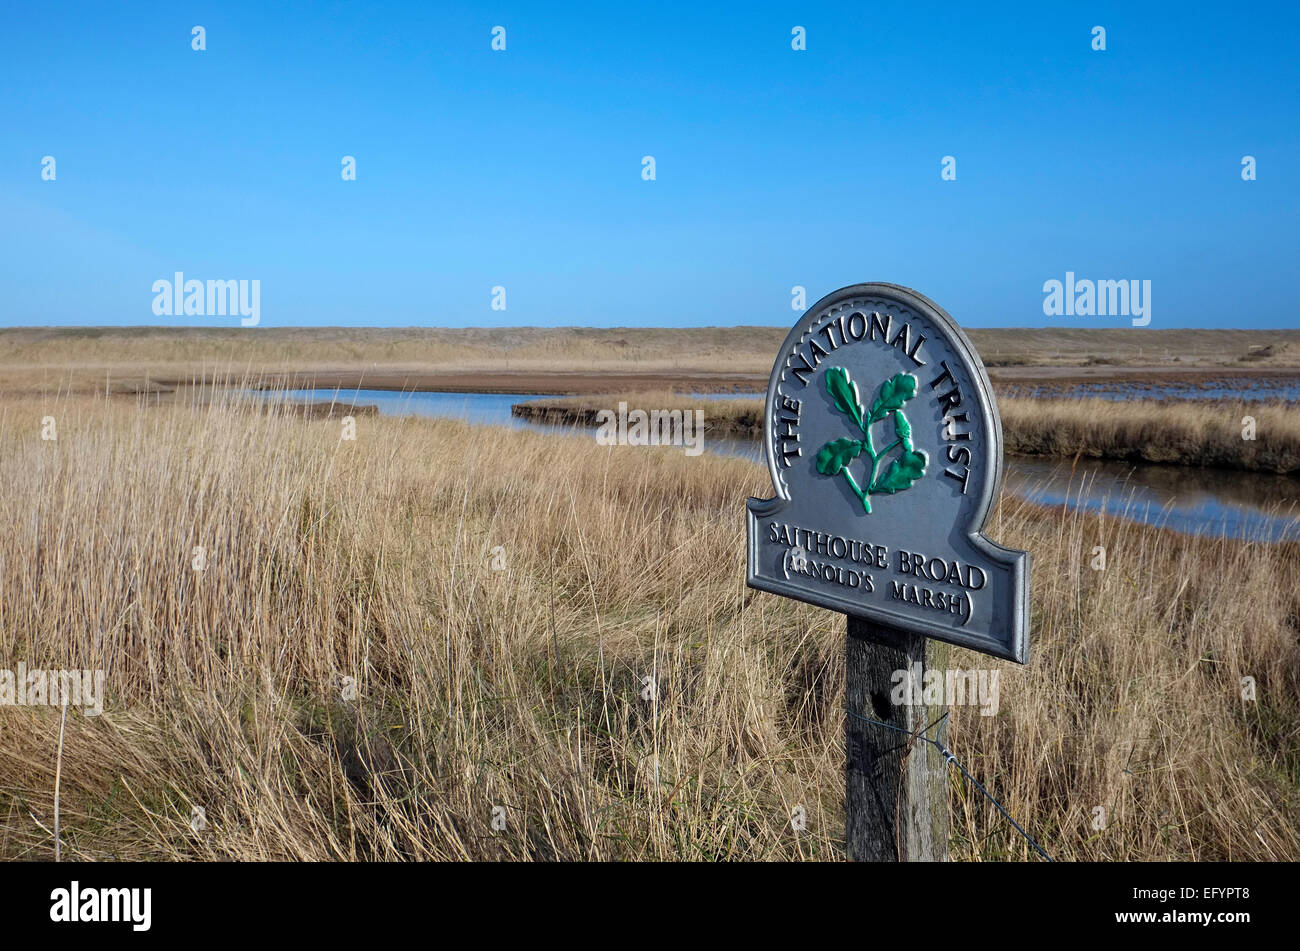 salthouse broad, cley, norfolk, england Stock Photo